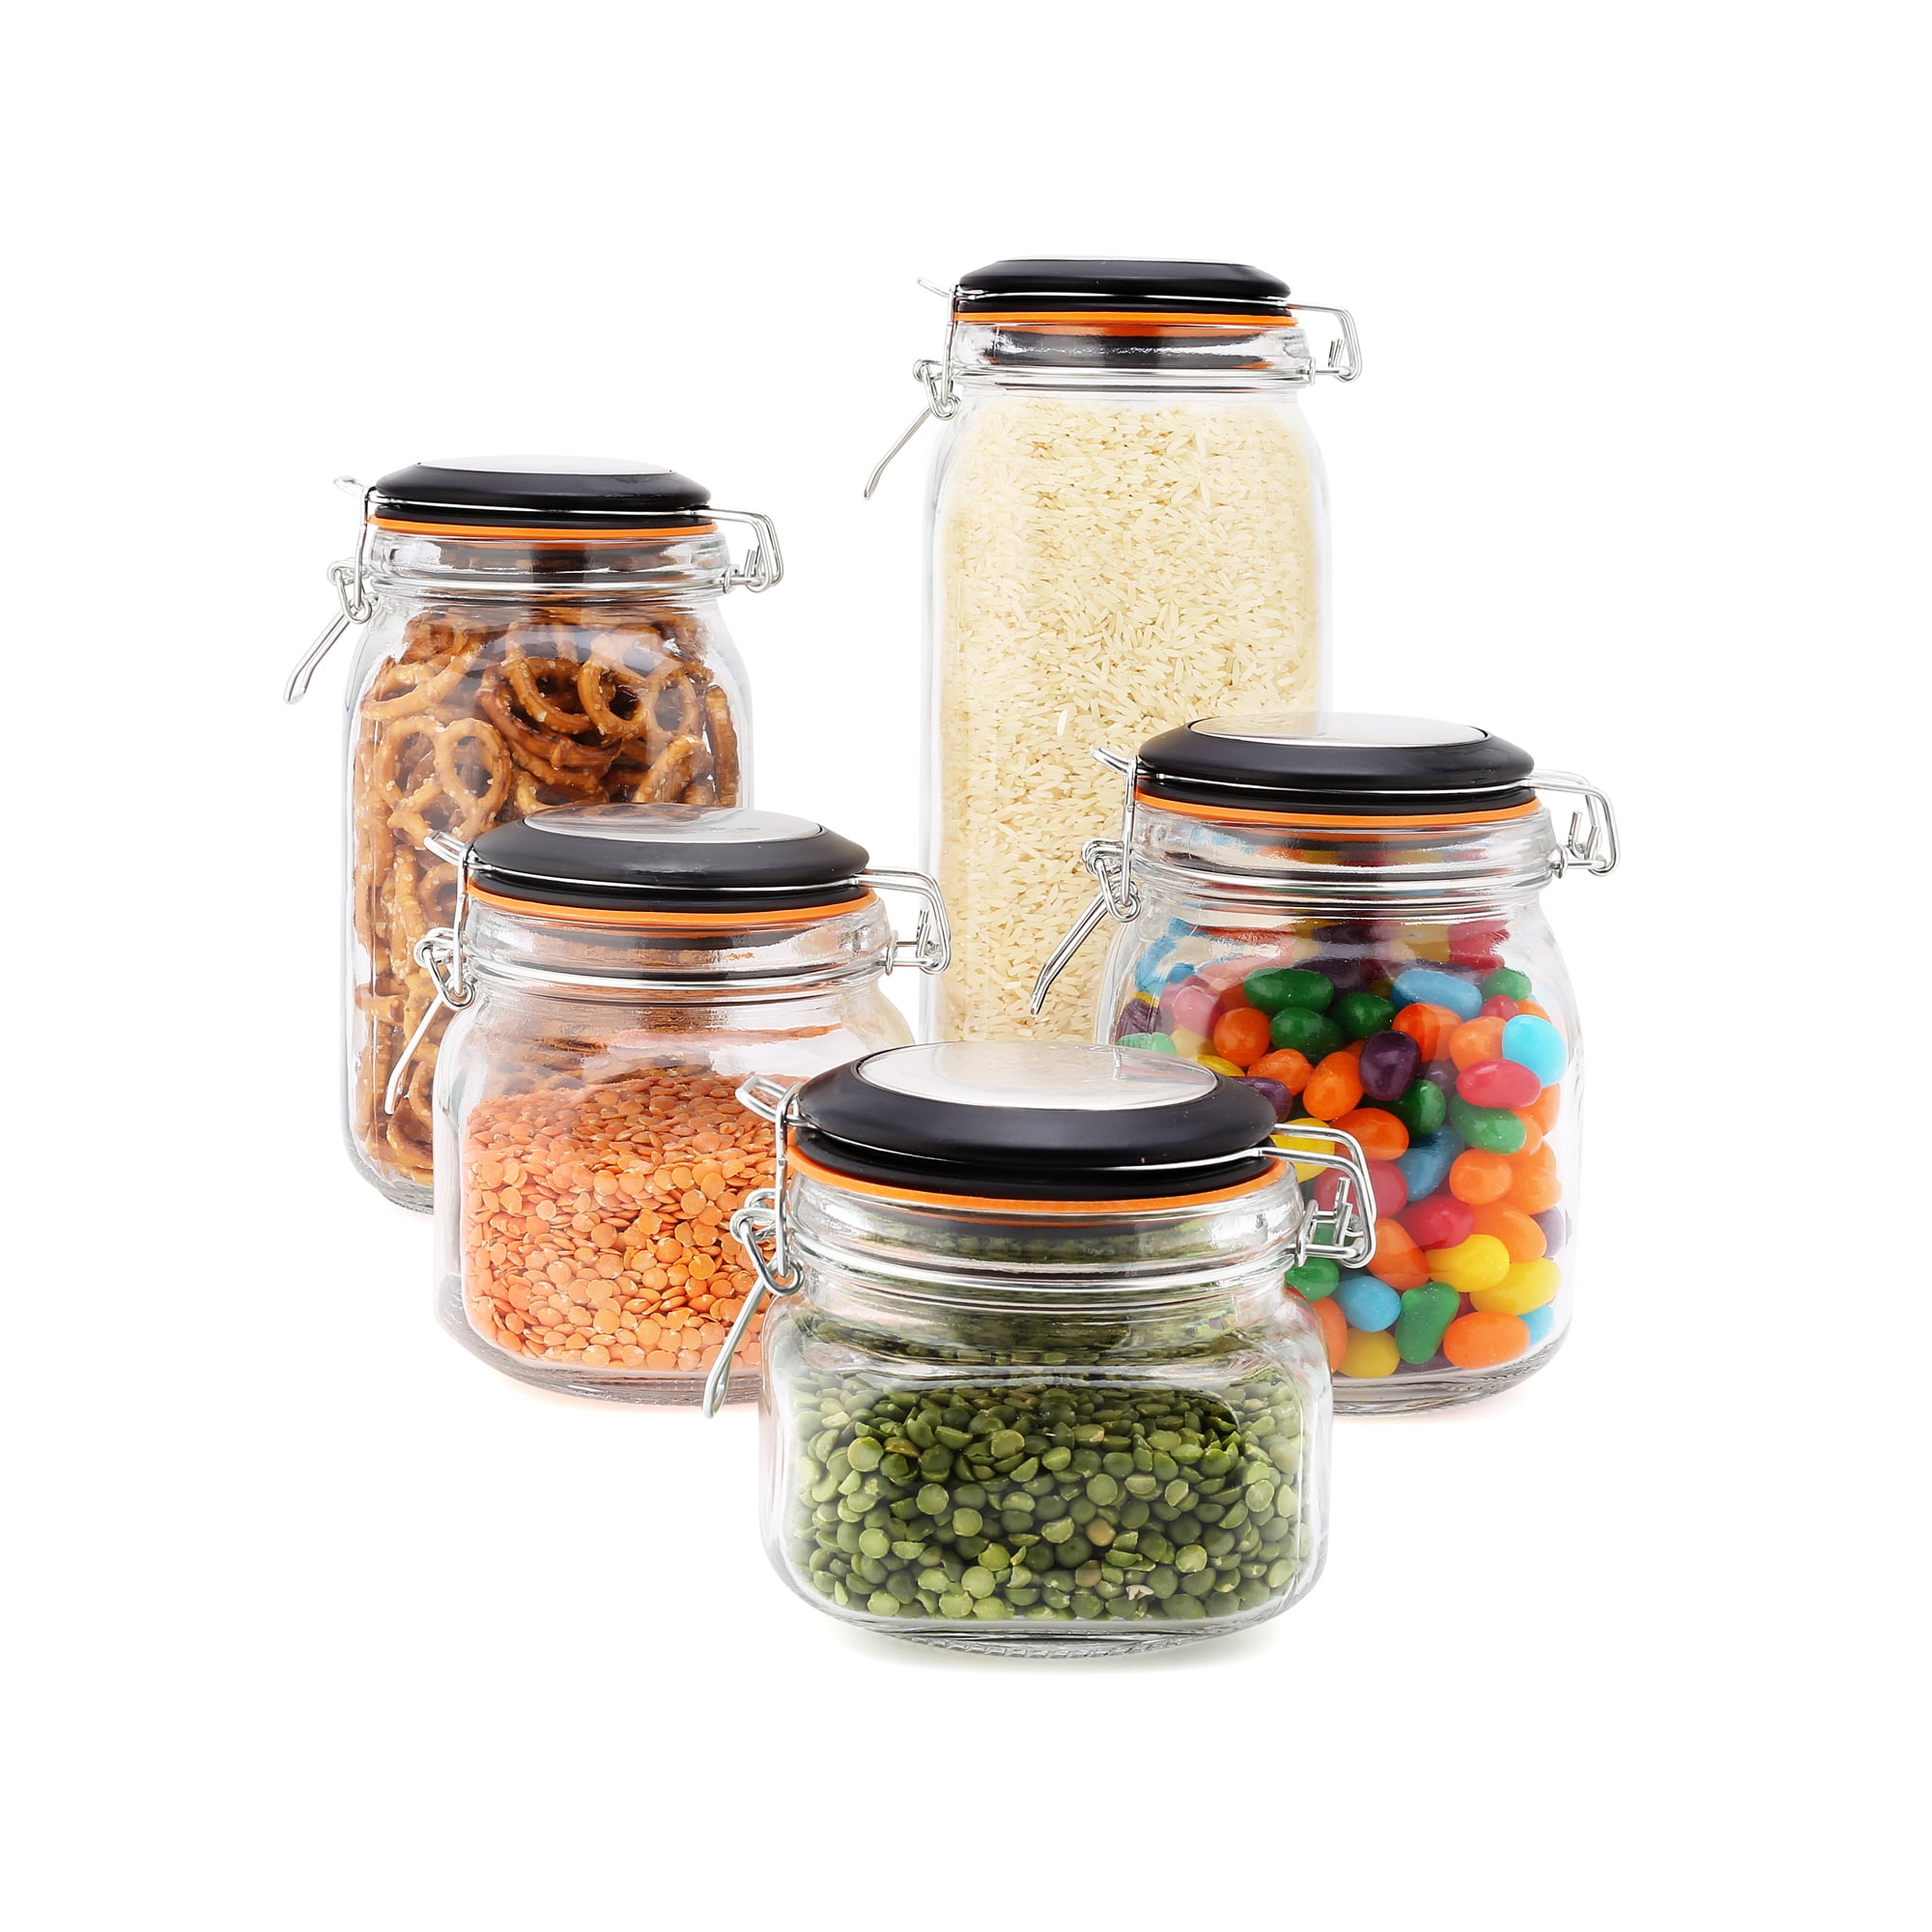 EatNeat 5-Pack of Glass Food Storage Containers with Airtight Snap